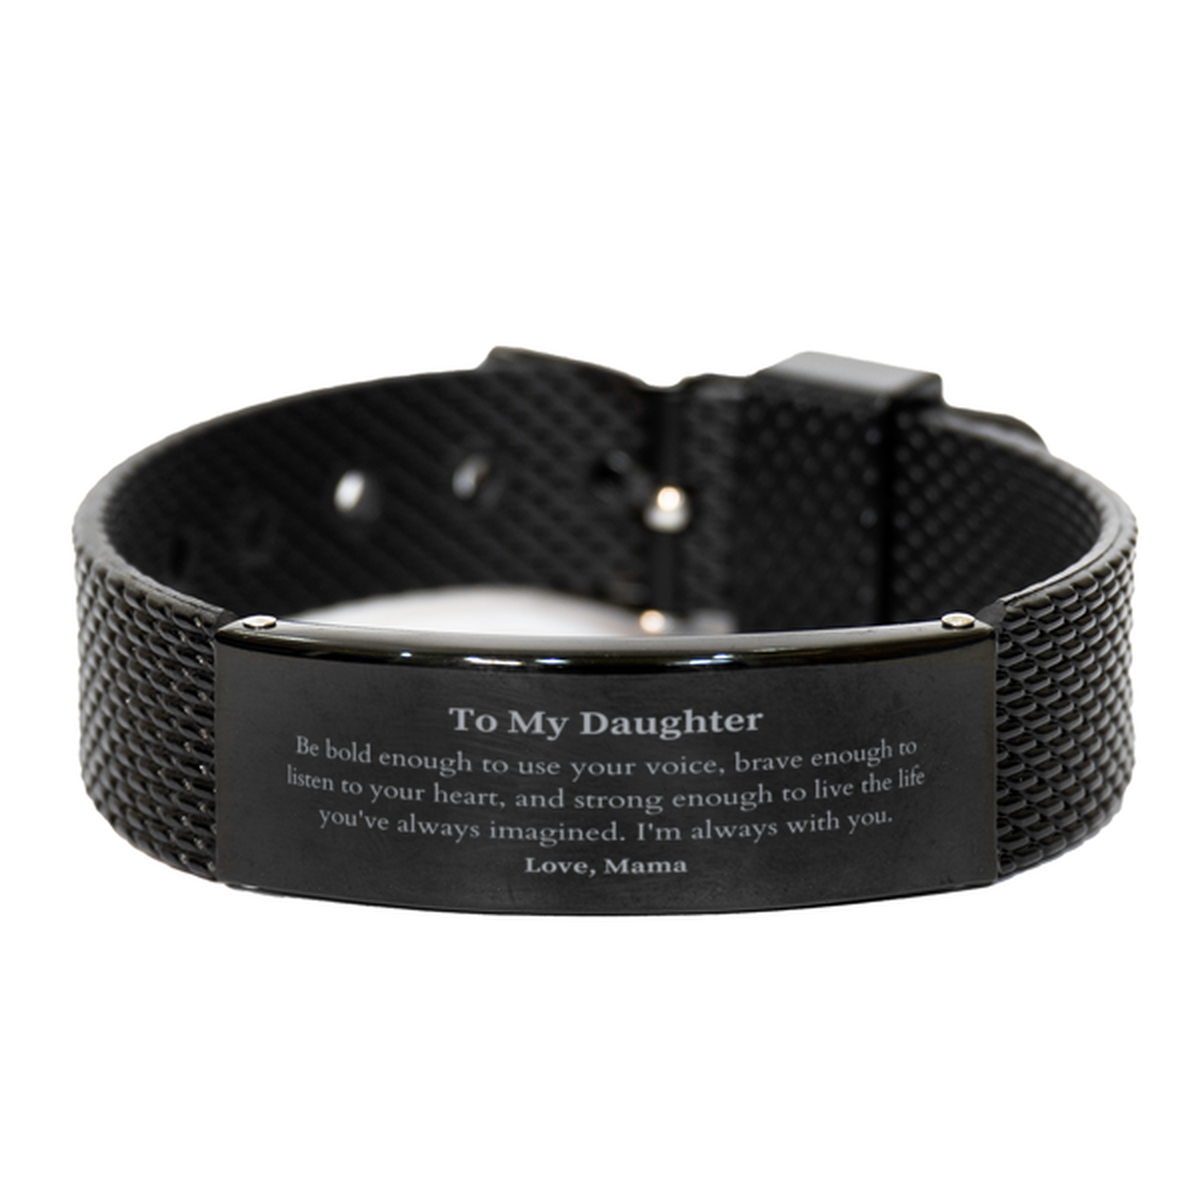 Keepsake Daughter Black Shark Mesh Bracelet Gift Idea Graduation Christmas Birthday Daughter from Mama, Daughter Be bold enough to use your voice, brave enough to listen to your heart. Love, Mama